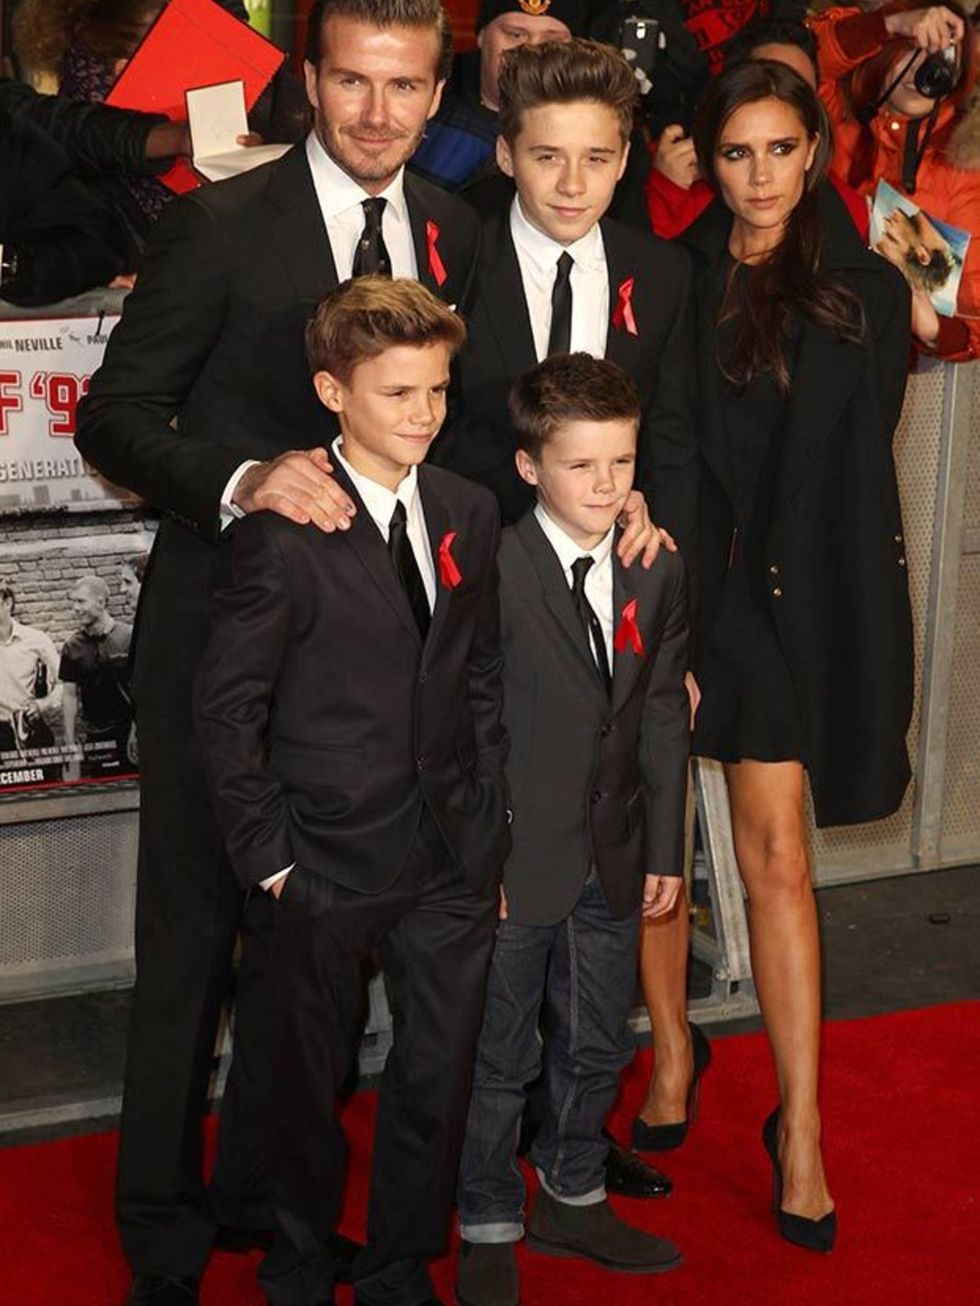 Brooklyn with the Beckham family at The Class of '92 film premiere 2013